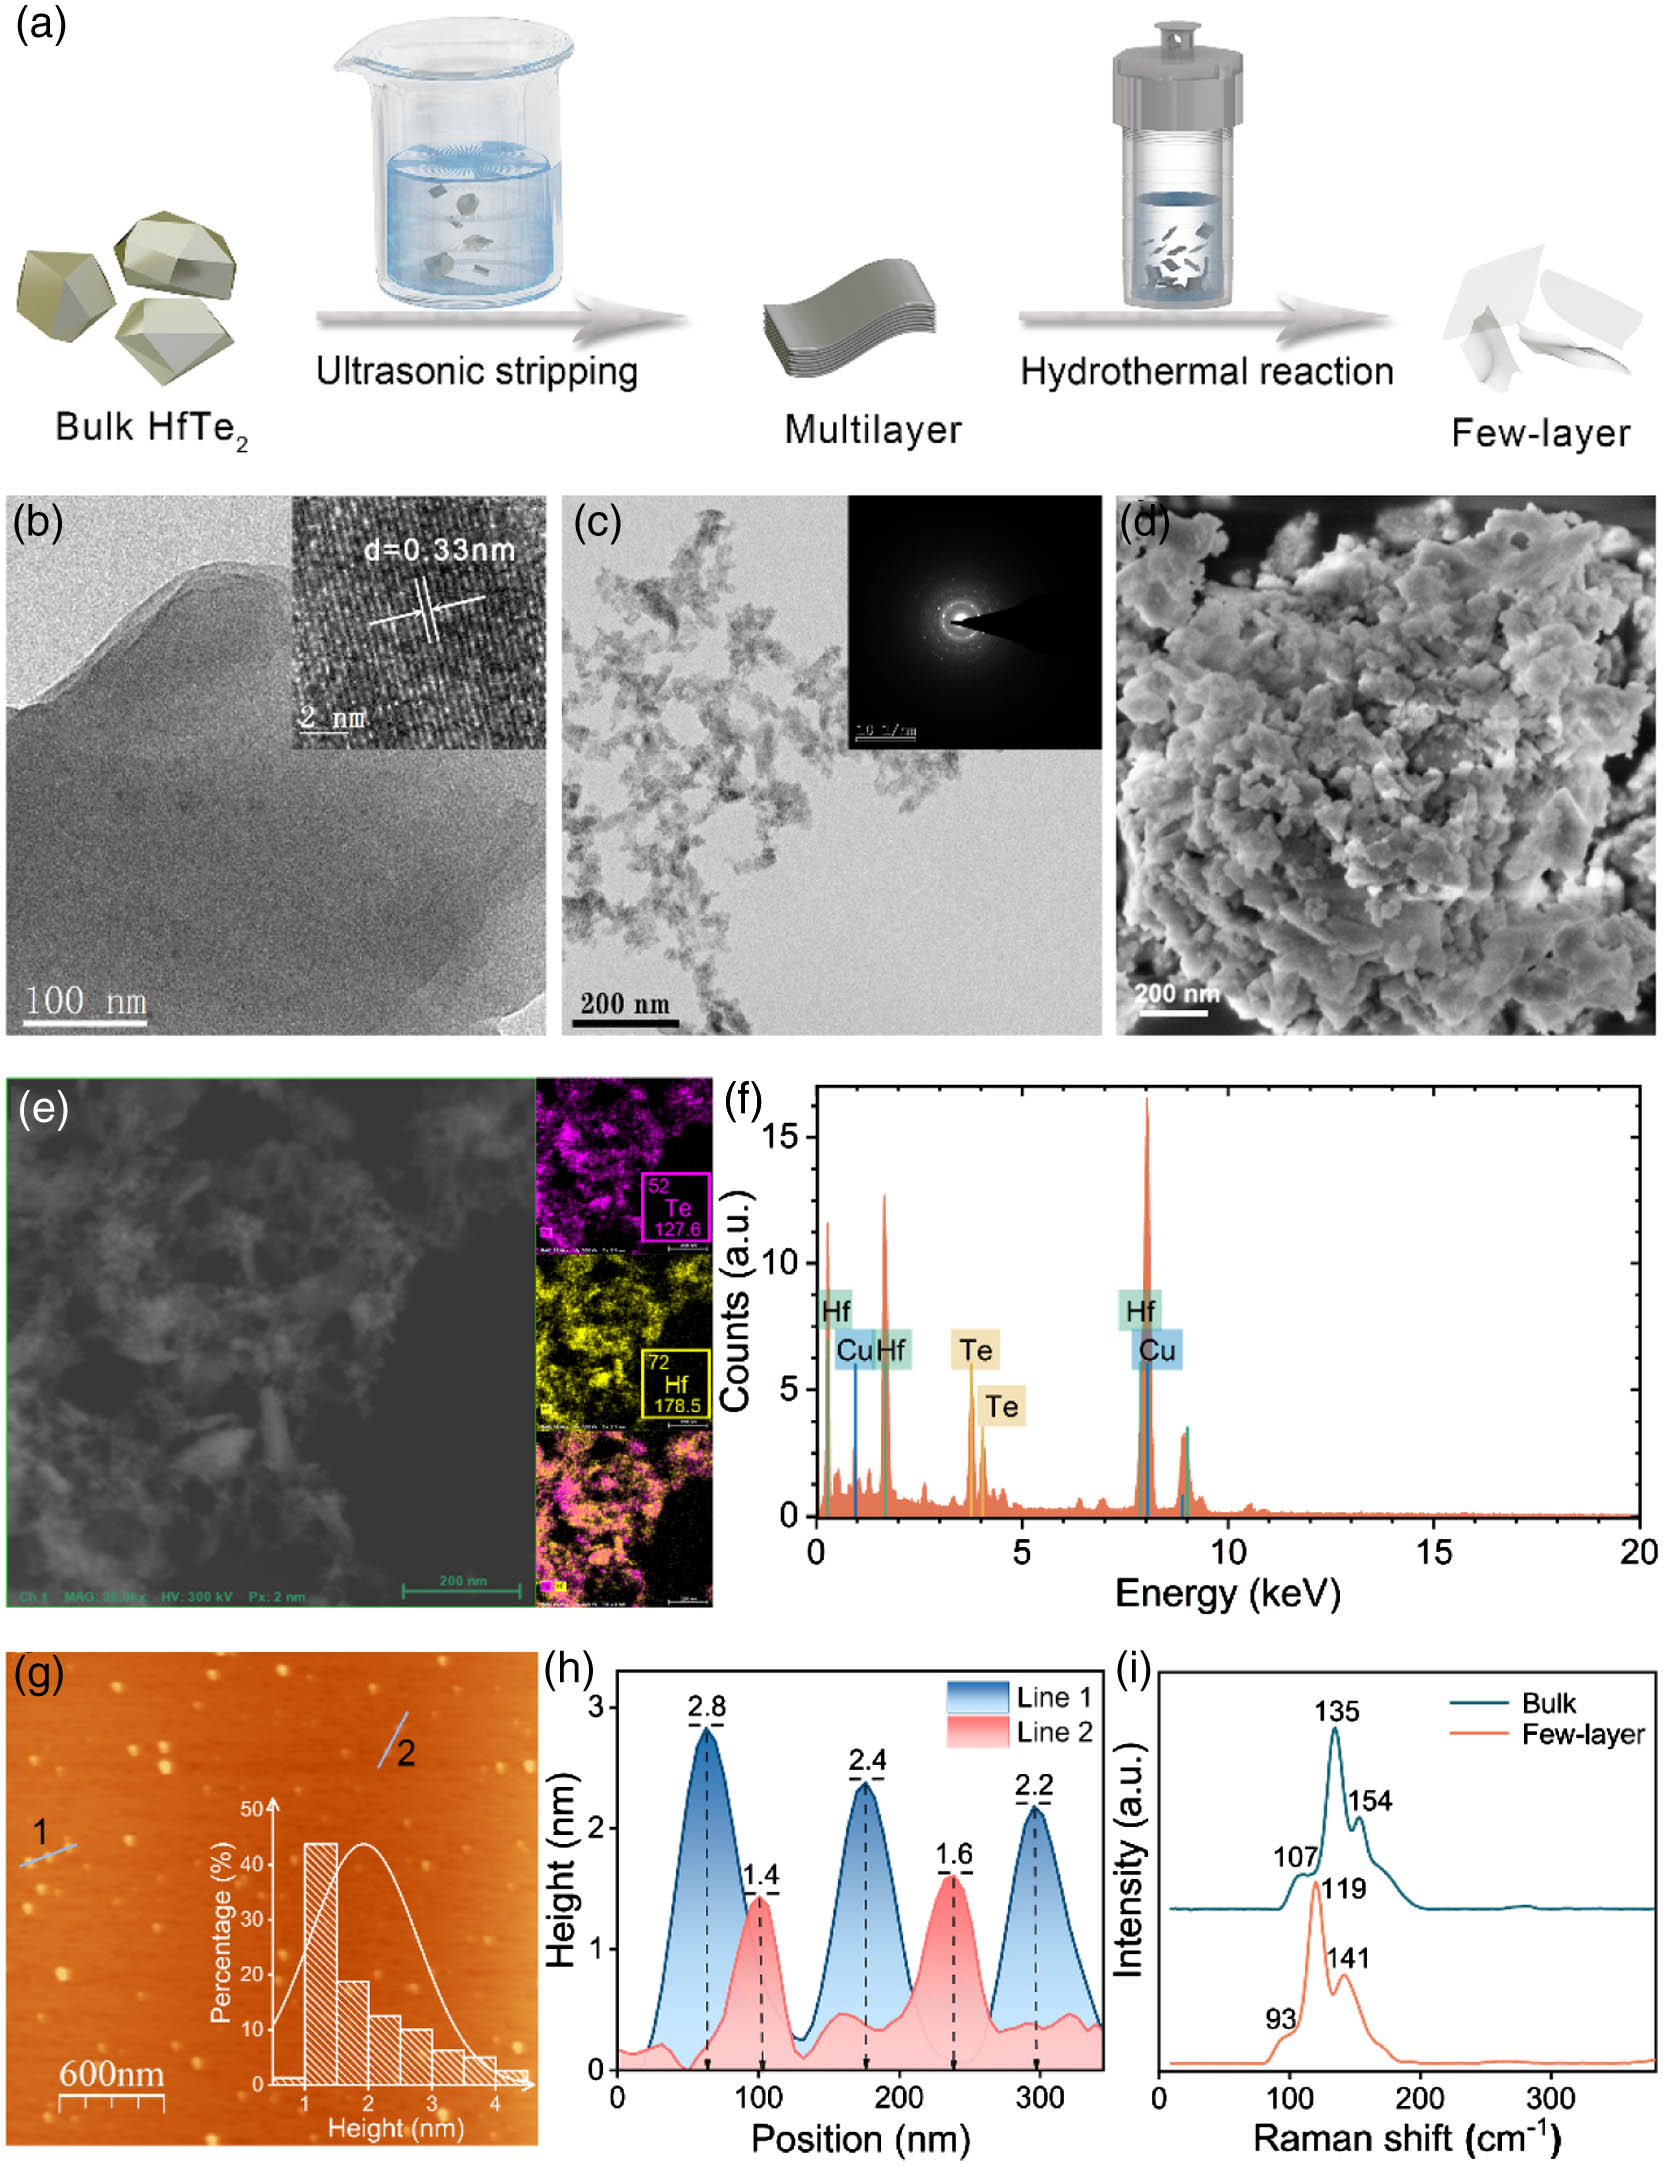 Synthesis and characterization of HfTe2 nanosheets. (a) Schematic representation of the preparation process of HfTe2 nanosheets. (b)–(c) TEM images of multilayer and few-layered hafnium ditelluride nanomaterials. The inset shows the HRTEM image and SAED pattern, respectively. (d) SEM image of HfTe2 nanosheets. (e) HAADF image and corresponding elemental mapping (Te and Hf) of HfTe2 nanosheets. (f) EDX pattern of HfTe2 nanosheets. (g) AFM image with the corresponding size distribution (inset) and (h) height analysis of HfTe2 nanosheets. (i) Raman spectra of bulk and few-layered HfTe2.